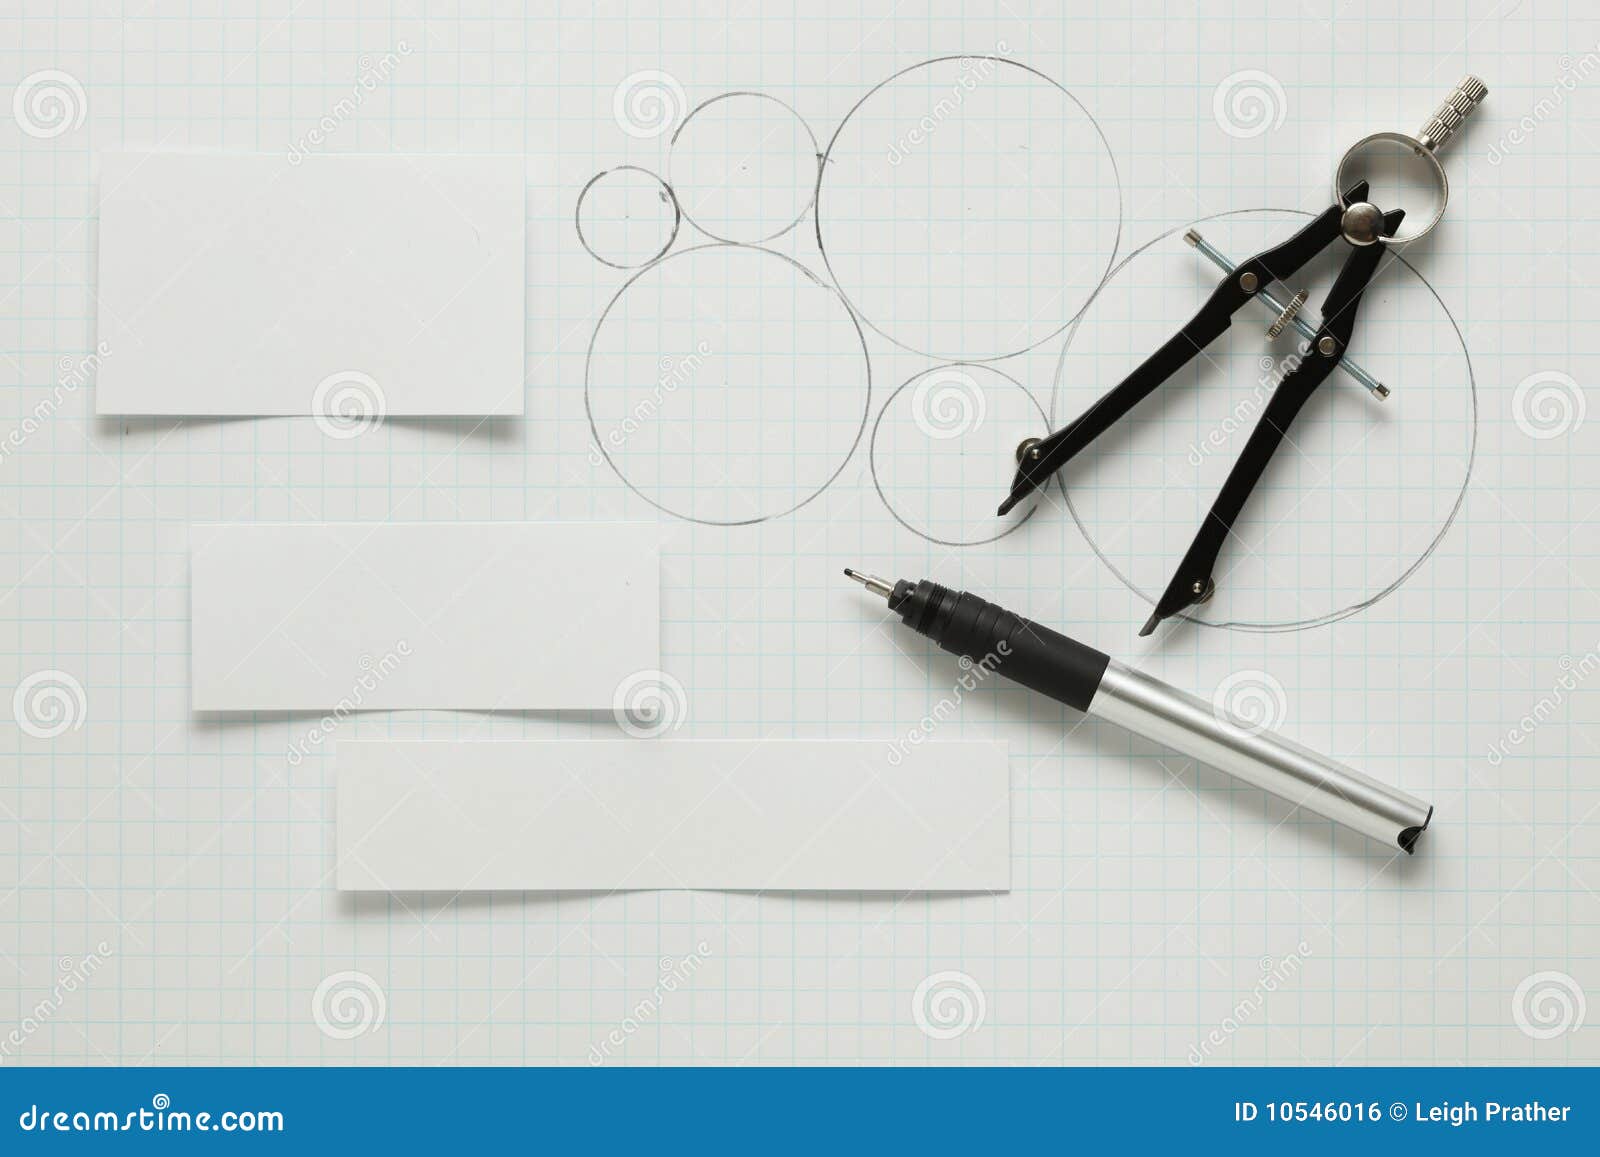 170,053 Blank Sketch Paper Royalty-Free Images, Stock Photos